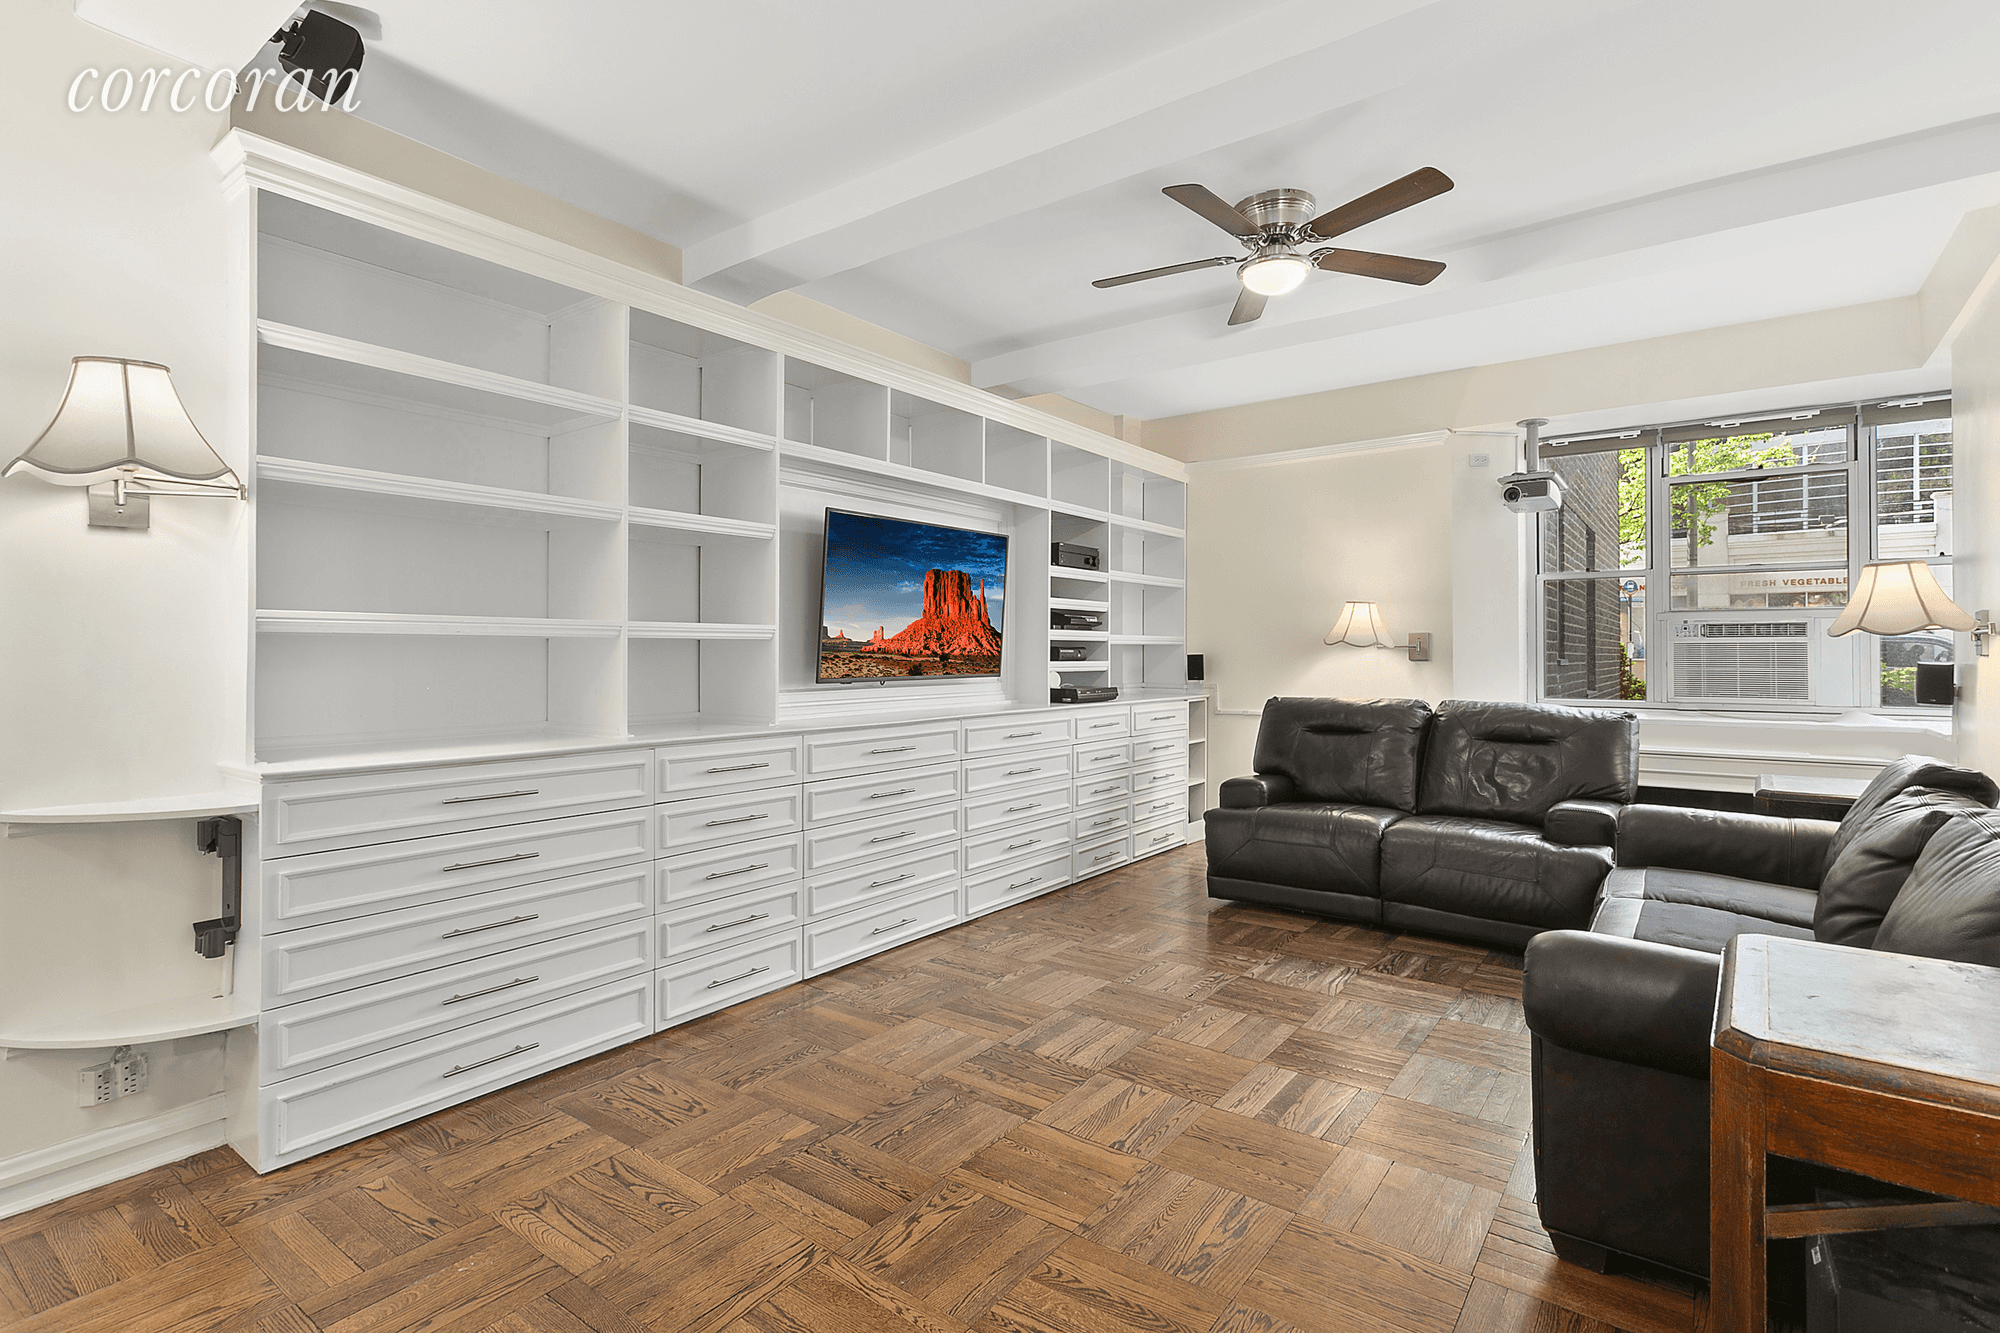 Spacious, custom renovated 2BR, meticulous and thoughtfully designed to maximize every inch of the apartment.